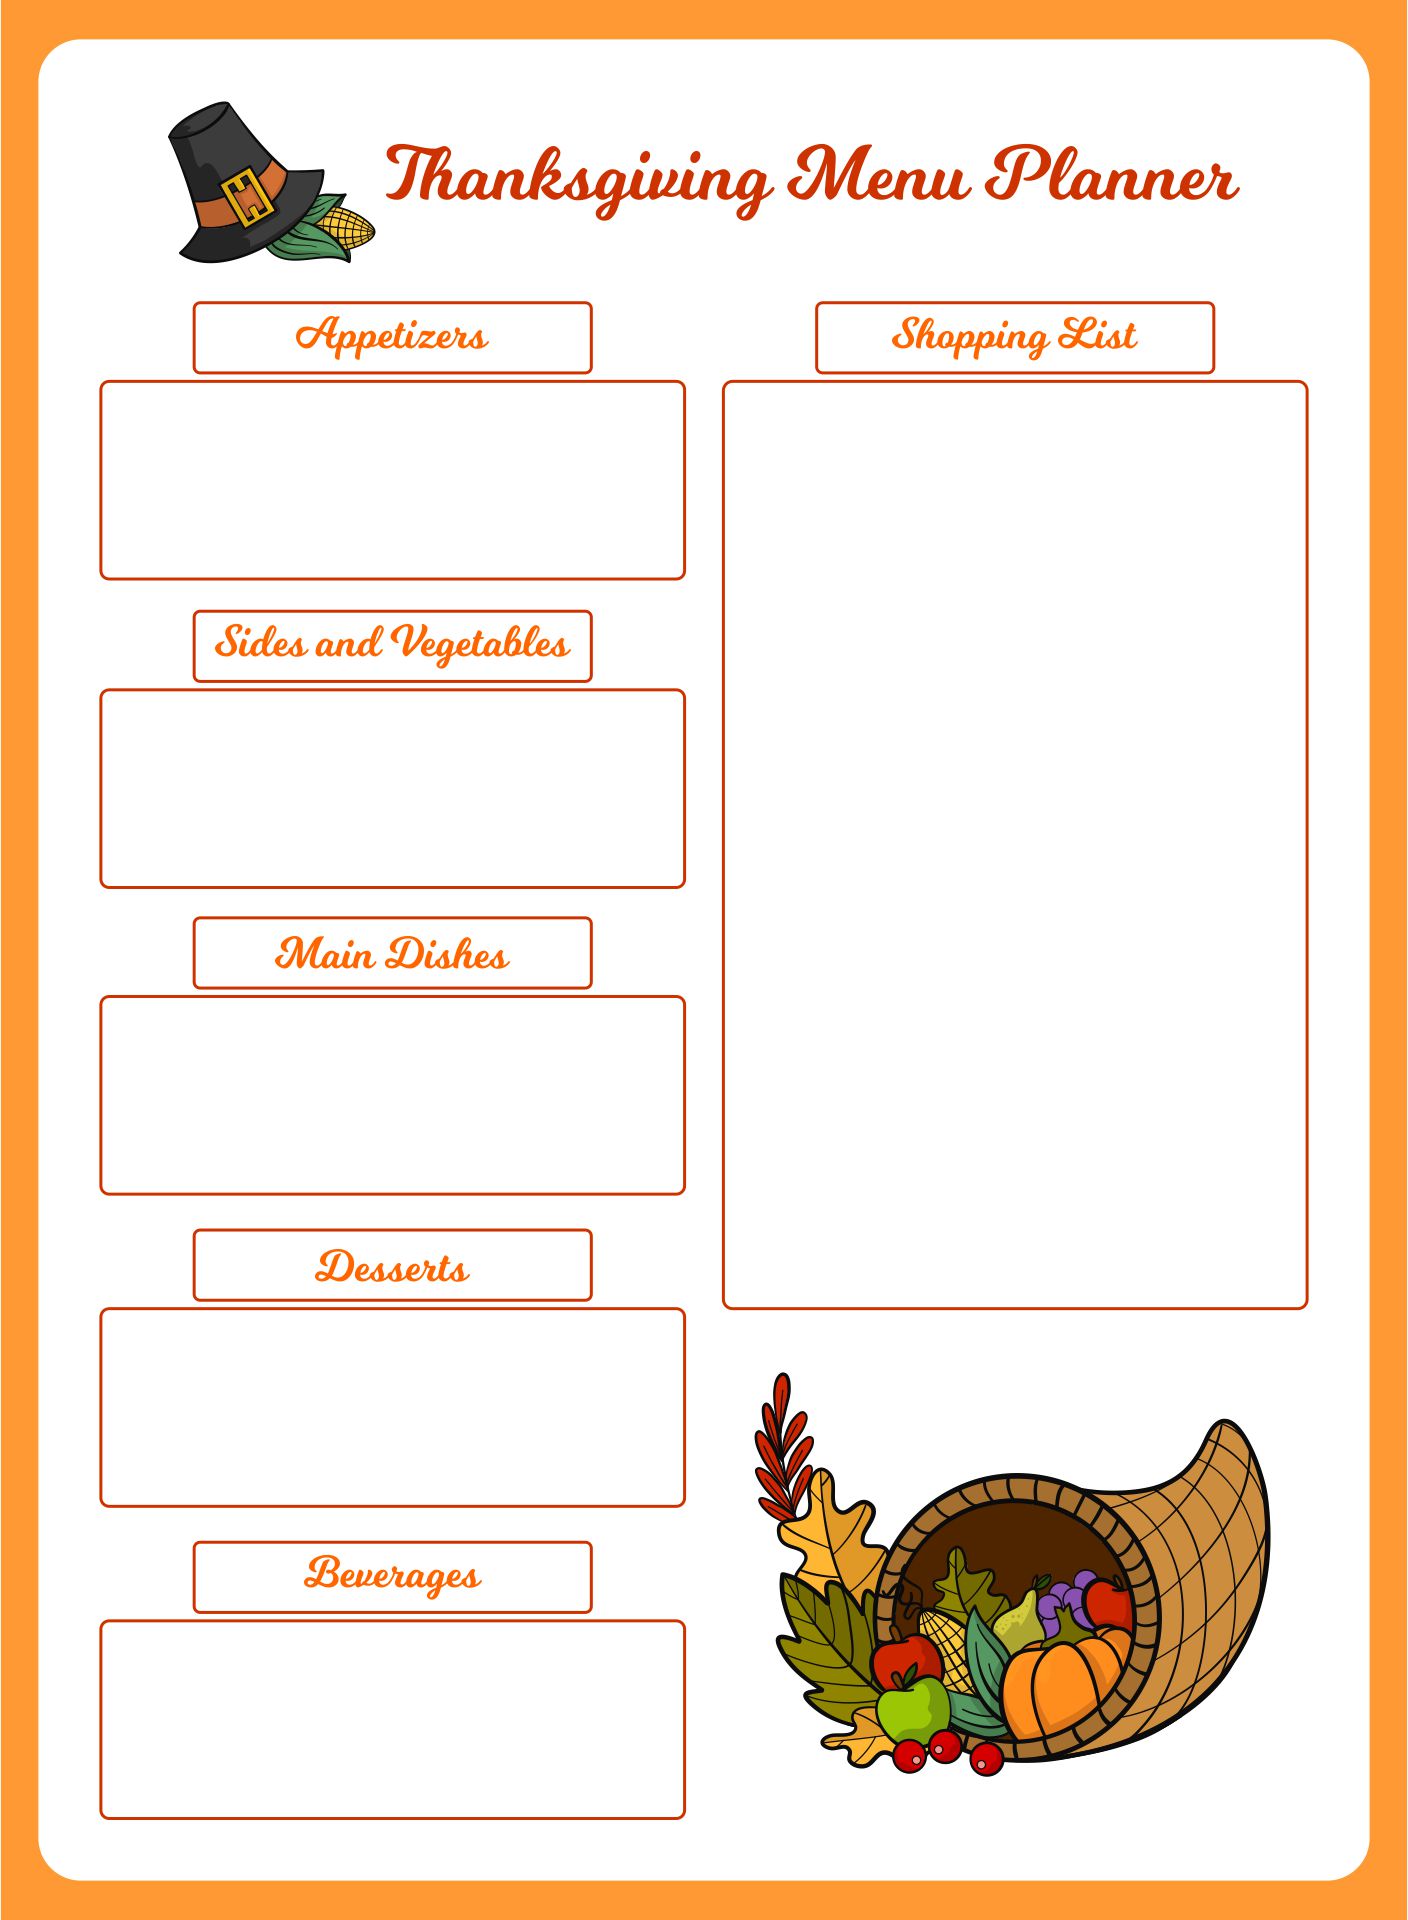 printable-thanksgiving-meal-planner